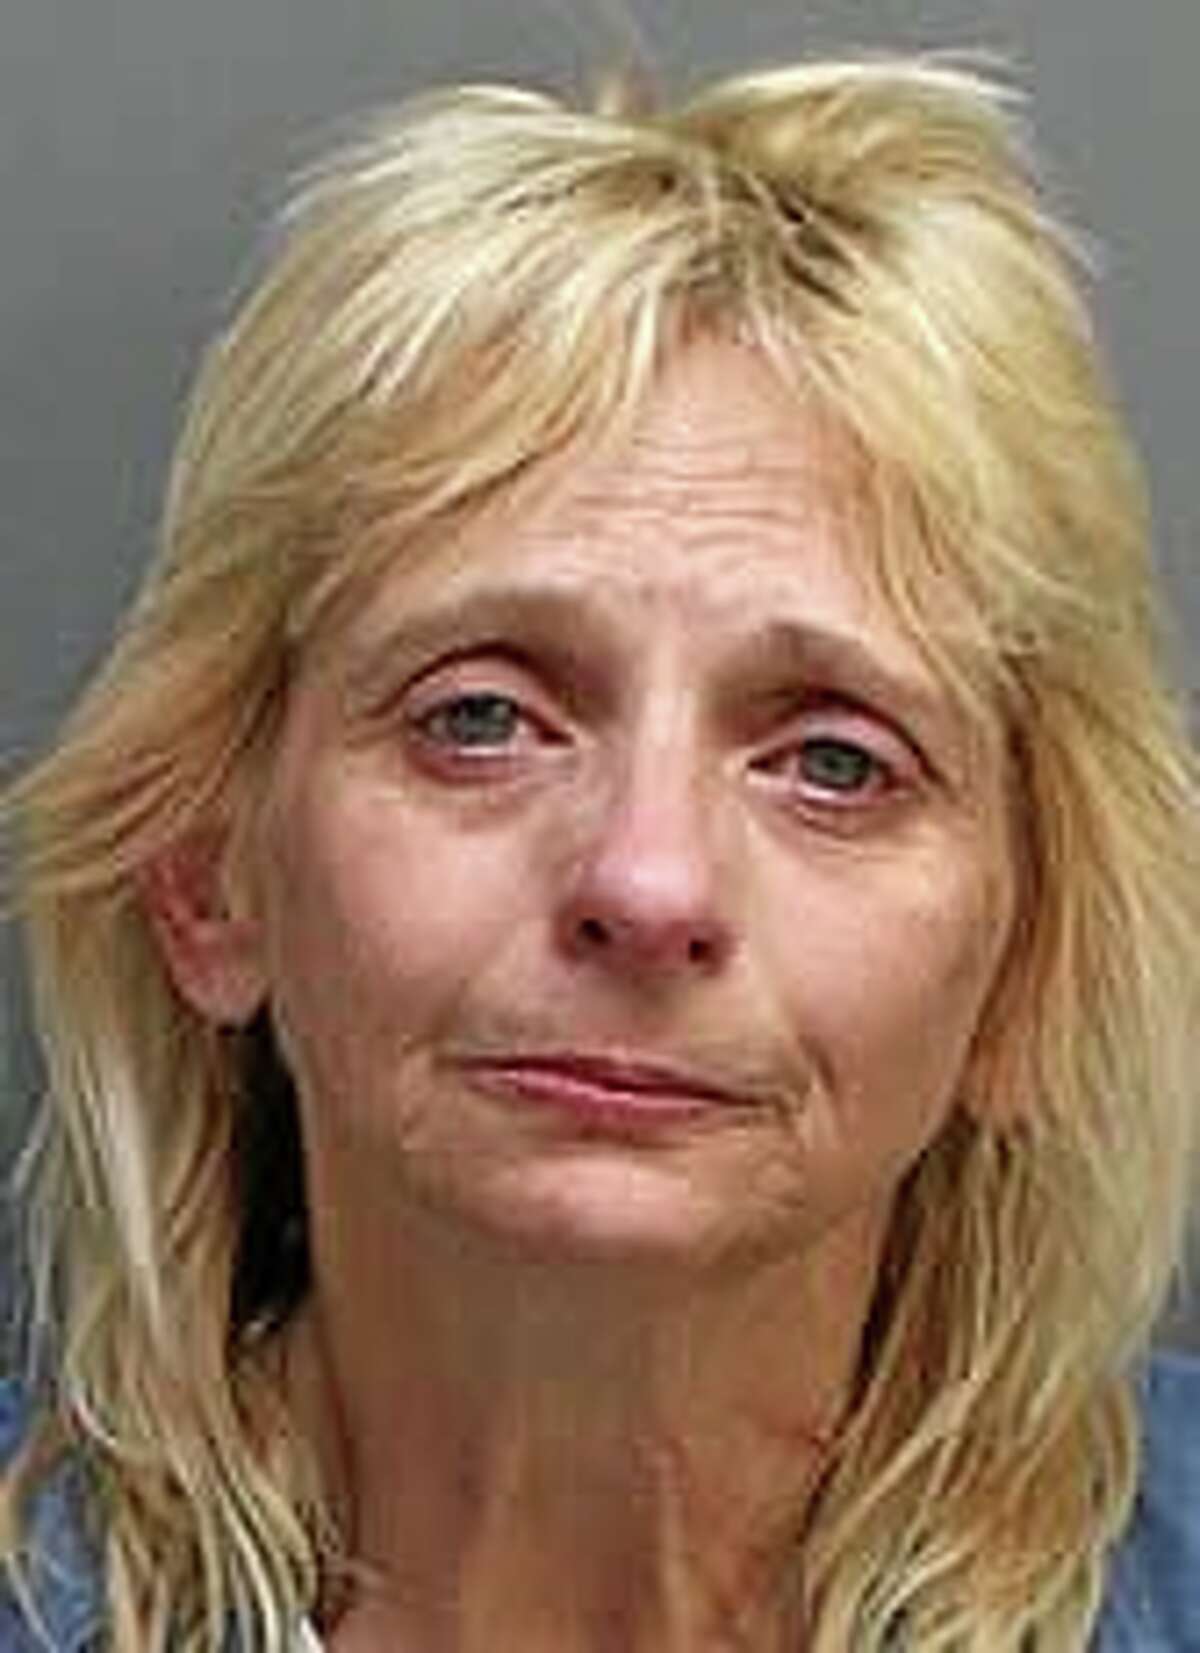 This undated booking photo released by the Riverside County Sheriff's Department shows suspect Cynthia Watson, from Oregon. Authorities in Southern California say the 51-year-old woman has been arrested on child-endangerment charges after her 2-year-old granddaughter drank tea with methamphetamine in it. Riverside County sheriff's Sgt. Craig McDonald says the toddler's mother called authorities Monday morning, June 30, 2014 saying the child had not slept and was talking rapidly, scratching, and couldn't sit still. (AP Photo/Riverside County Sheriff's Department )